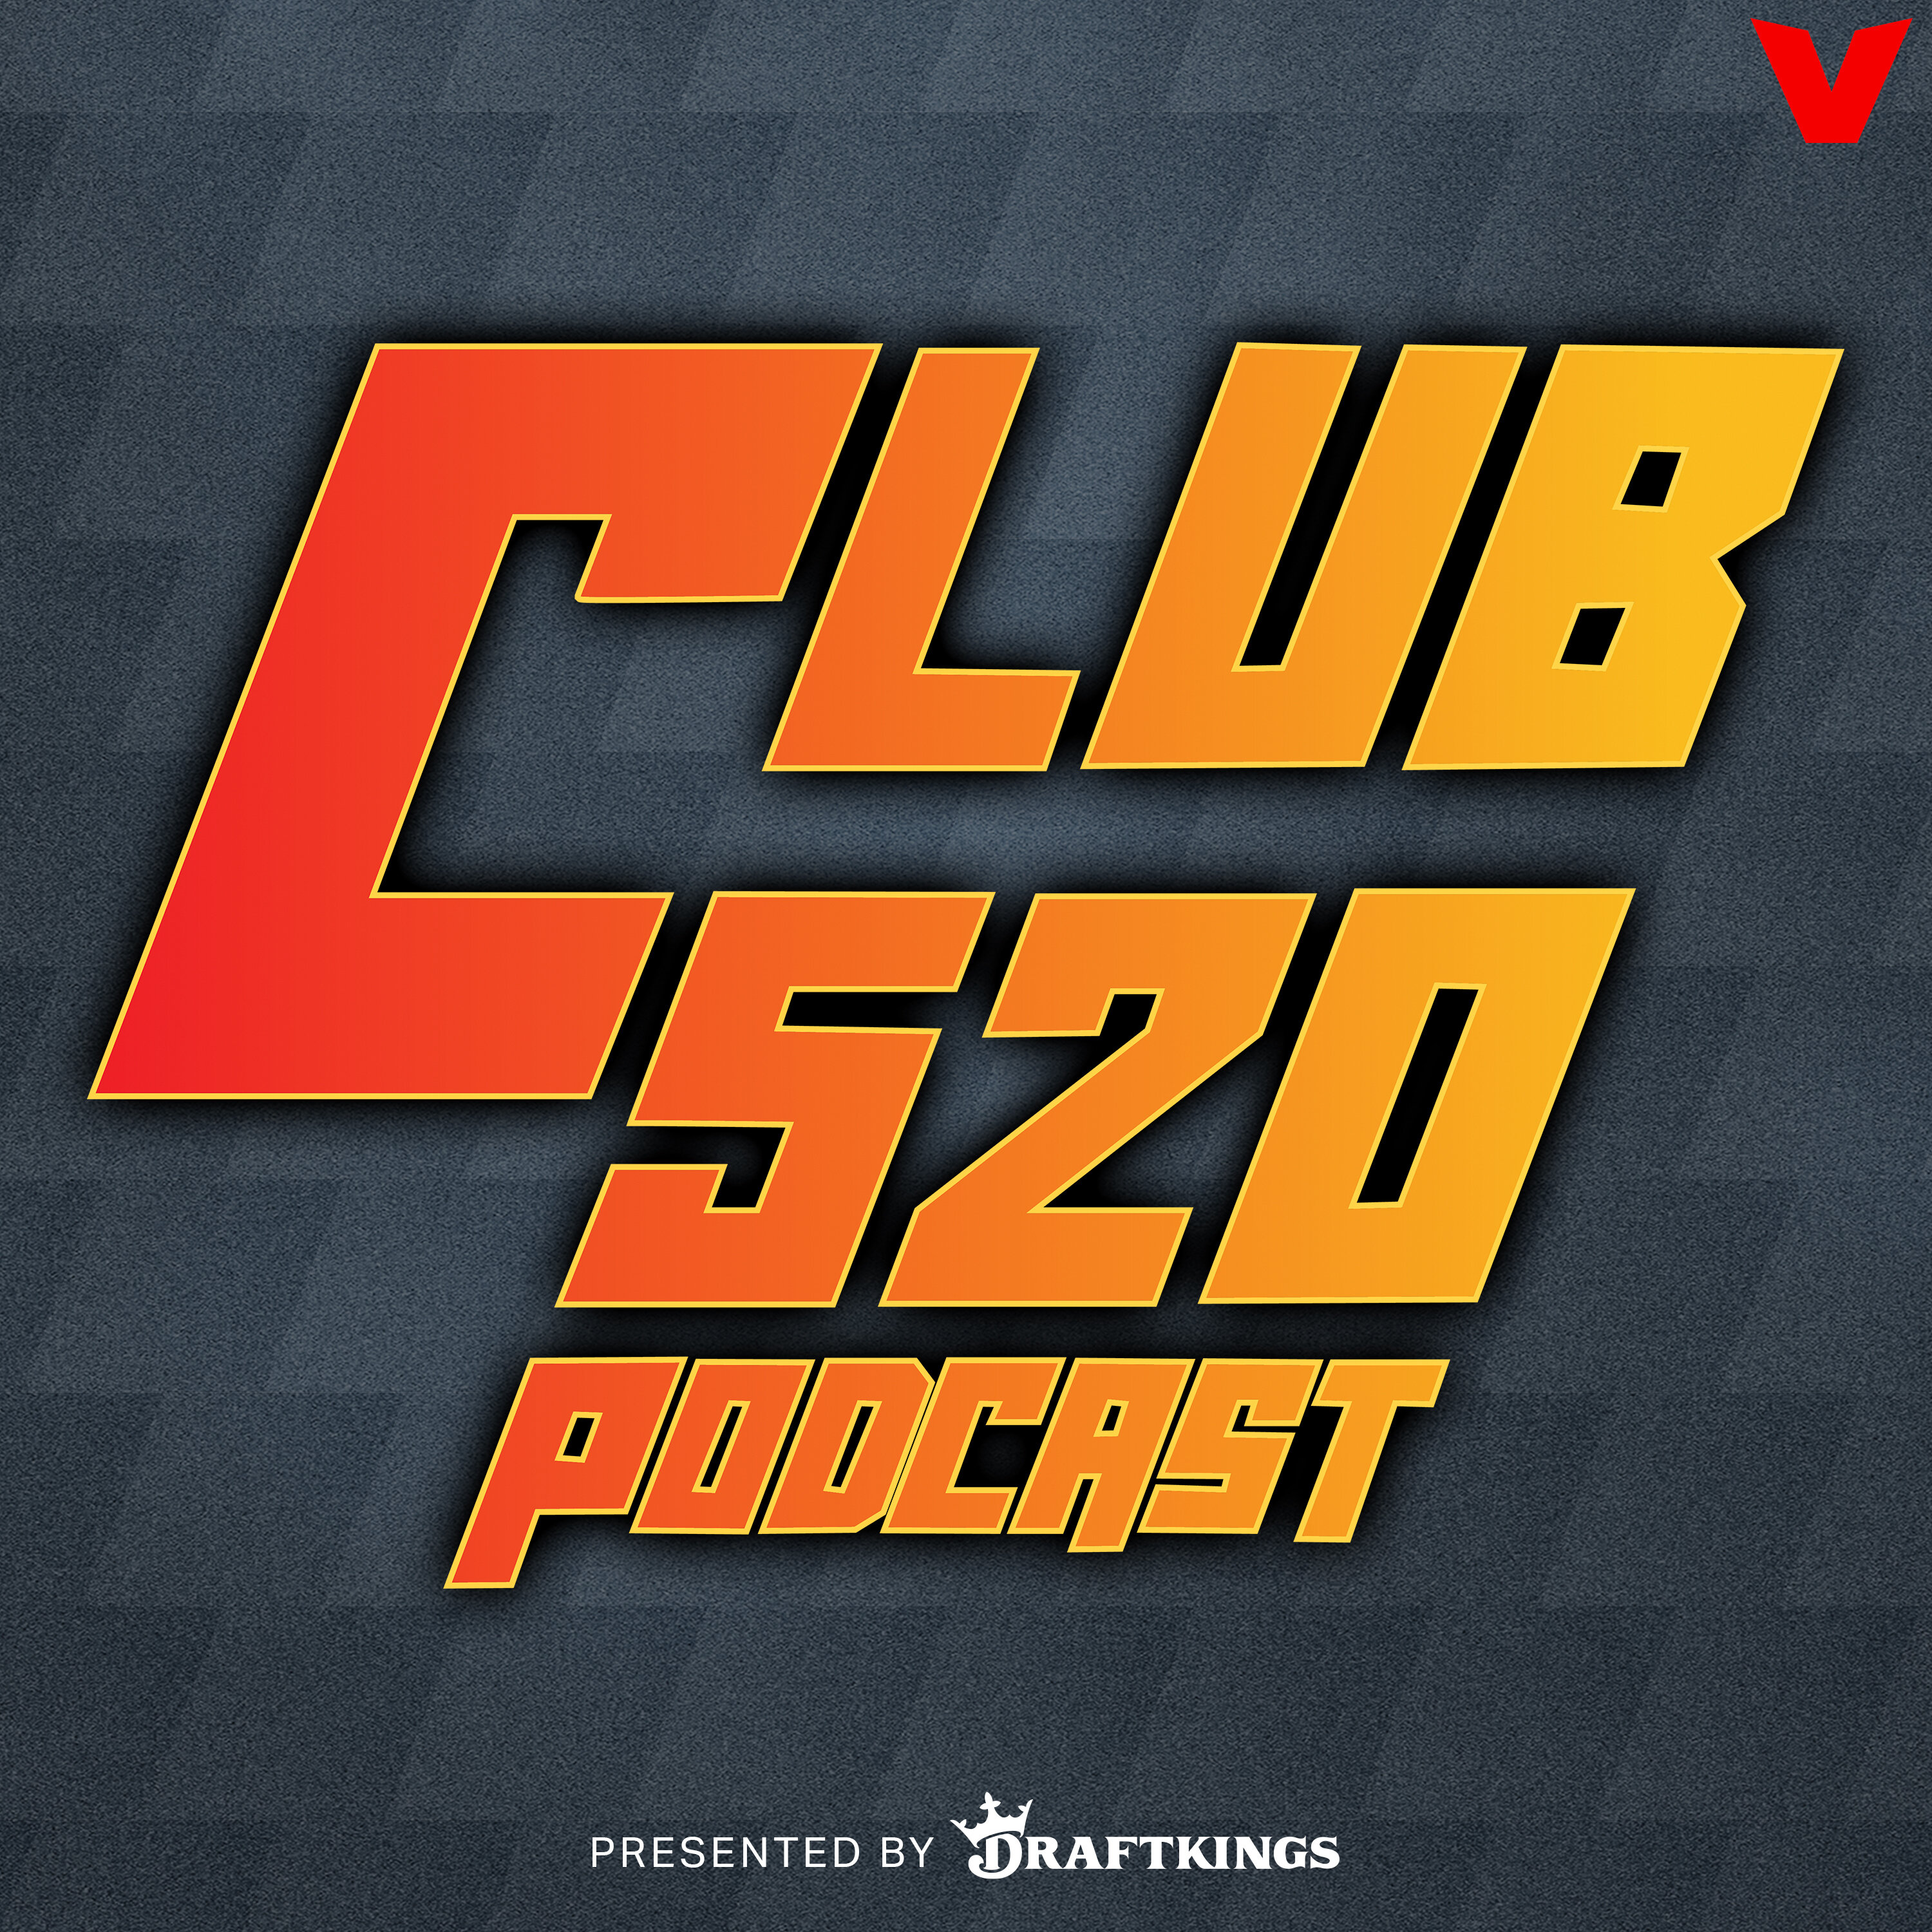 Club 520 - Wesley Matthews on guarding Kobe Bryant, playing with LeBron James, the Big East